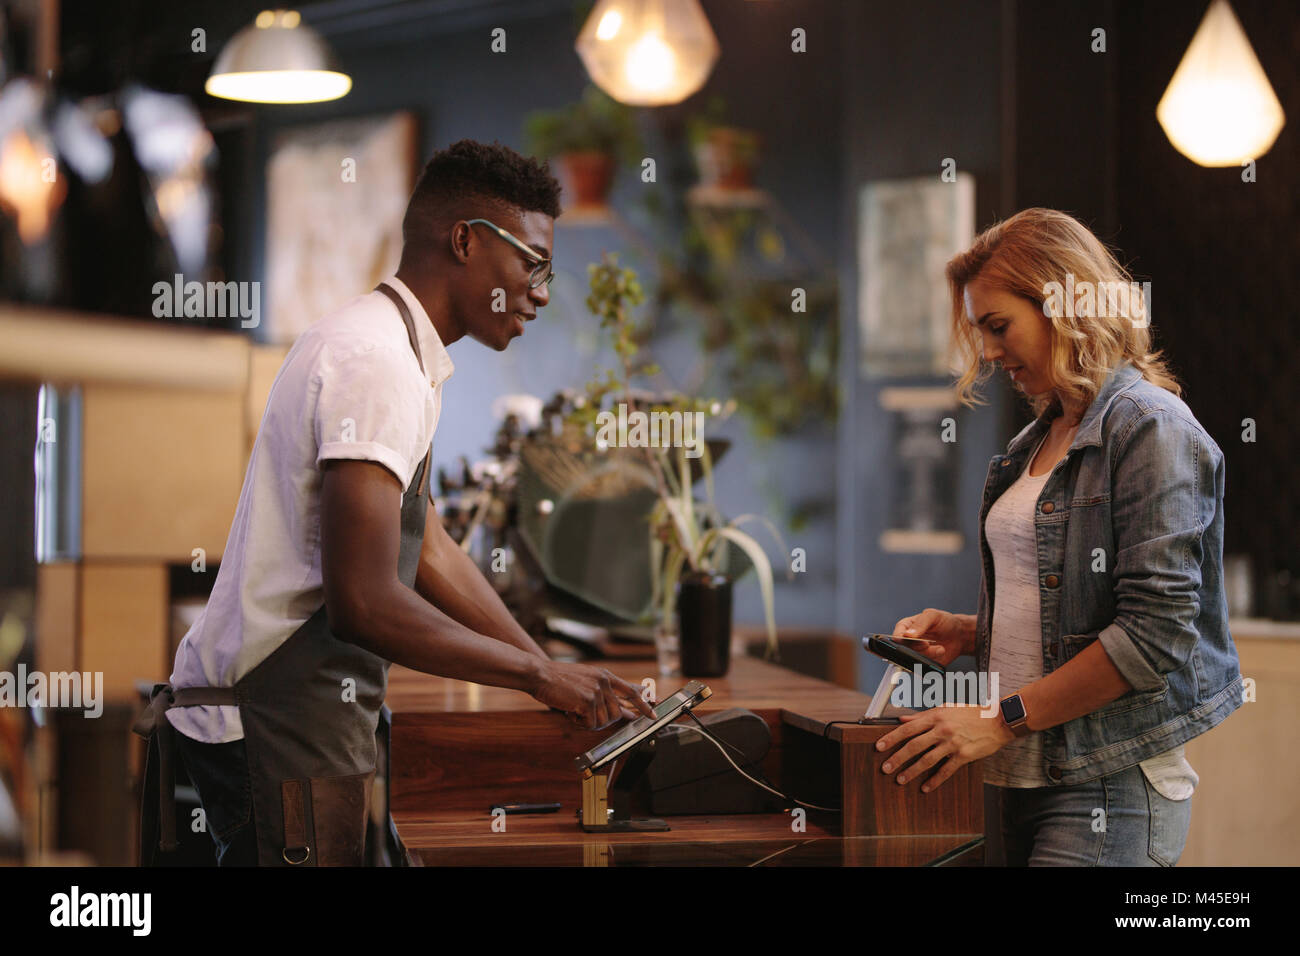 Coffee shop owner at the billing counter accepting payment from customer. Woman paying her coffee bills wirelessly using credit card. Stock Photo